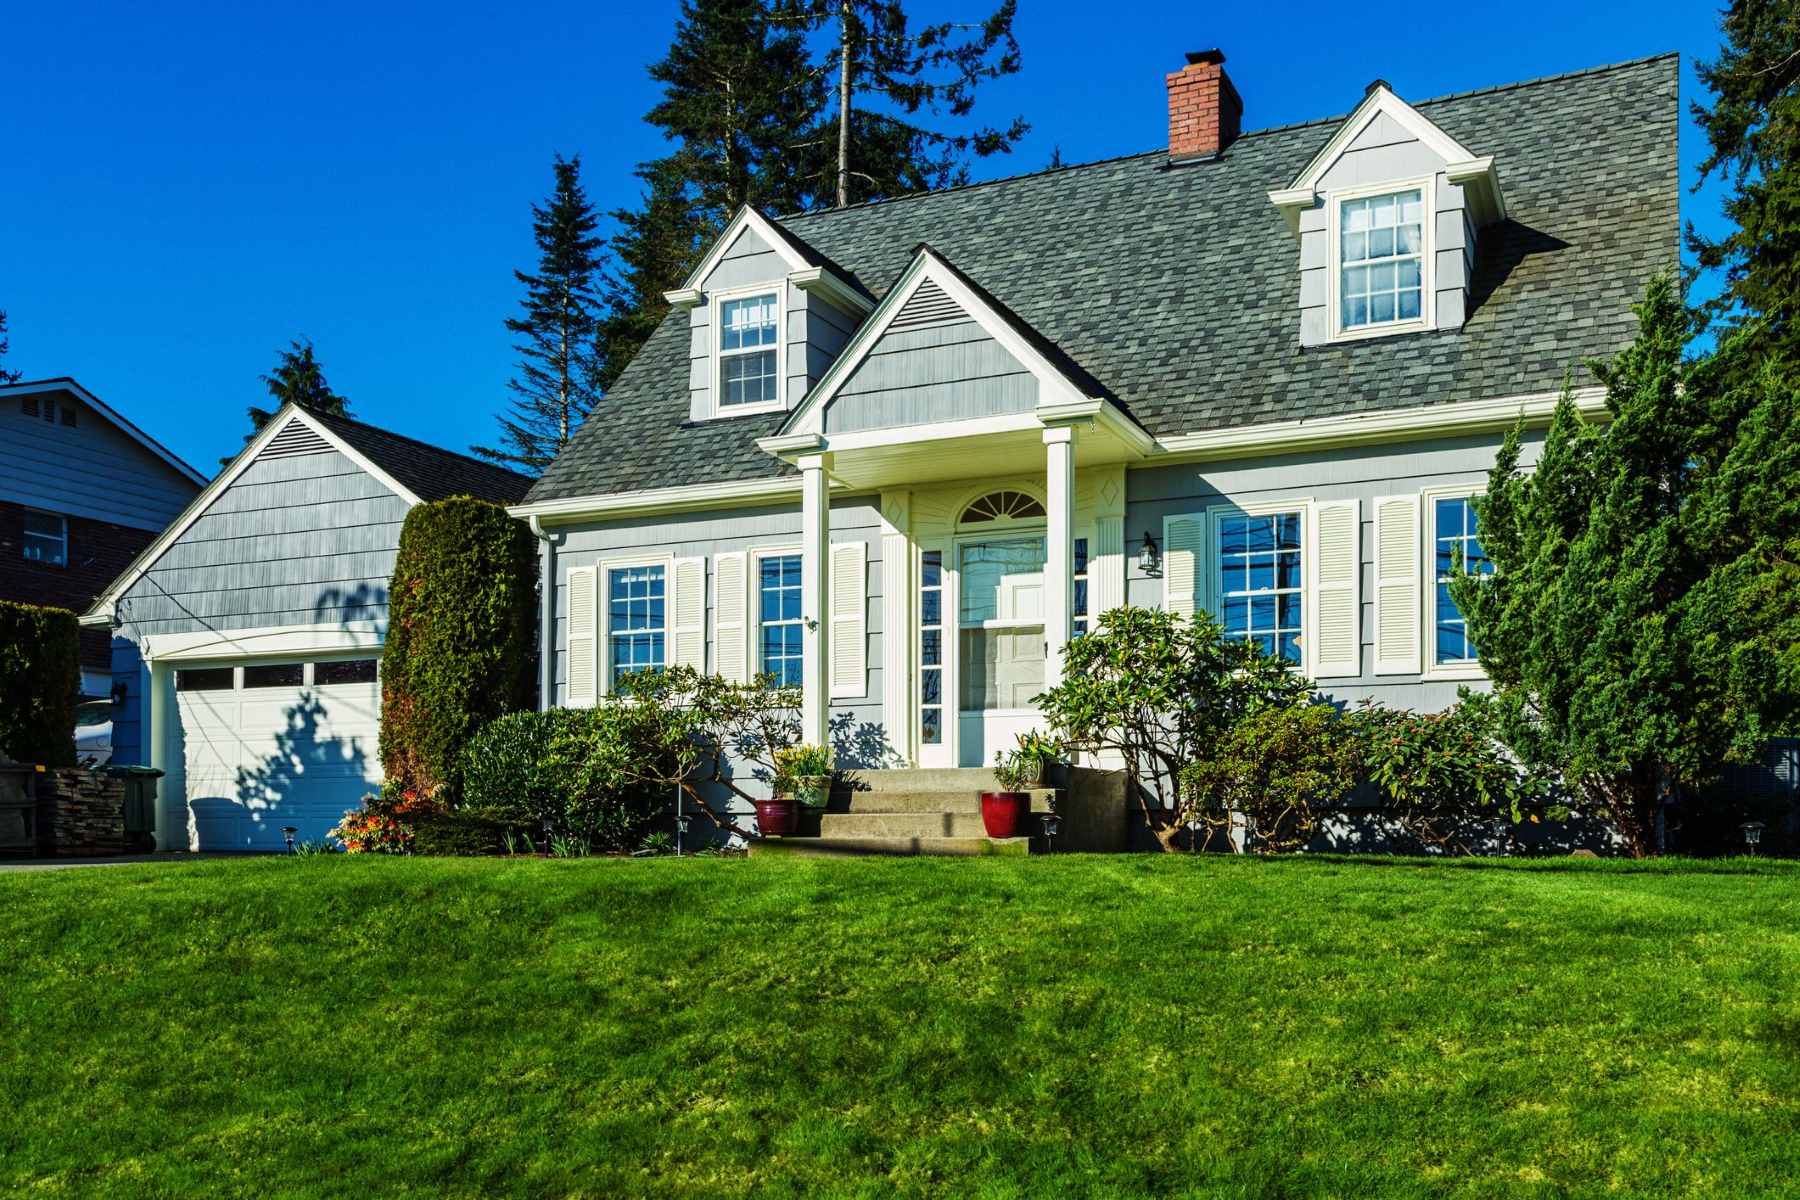 What’s A Good Landscape Design For A Cape Cod Style House